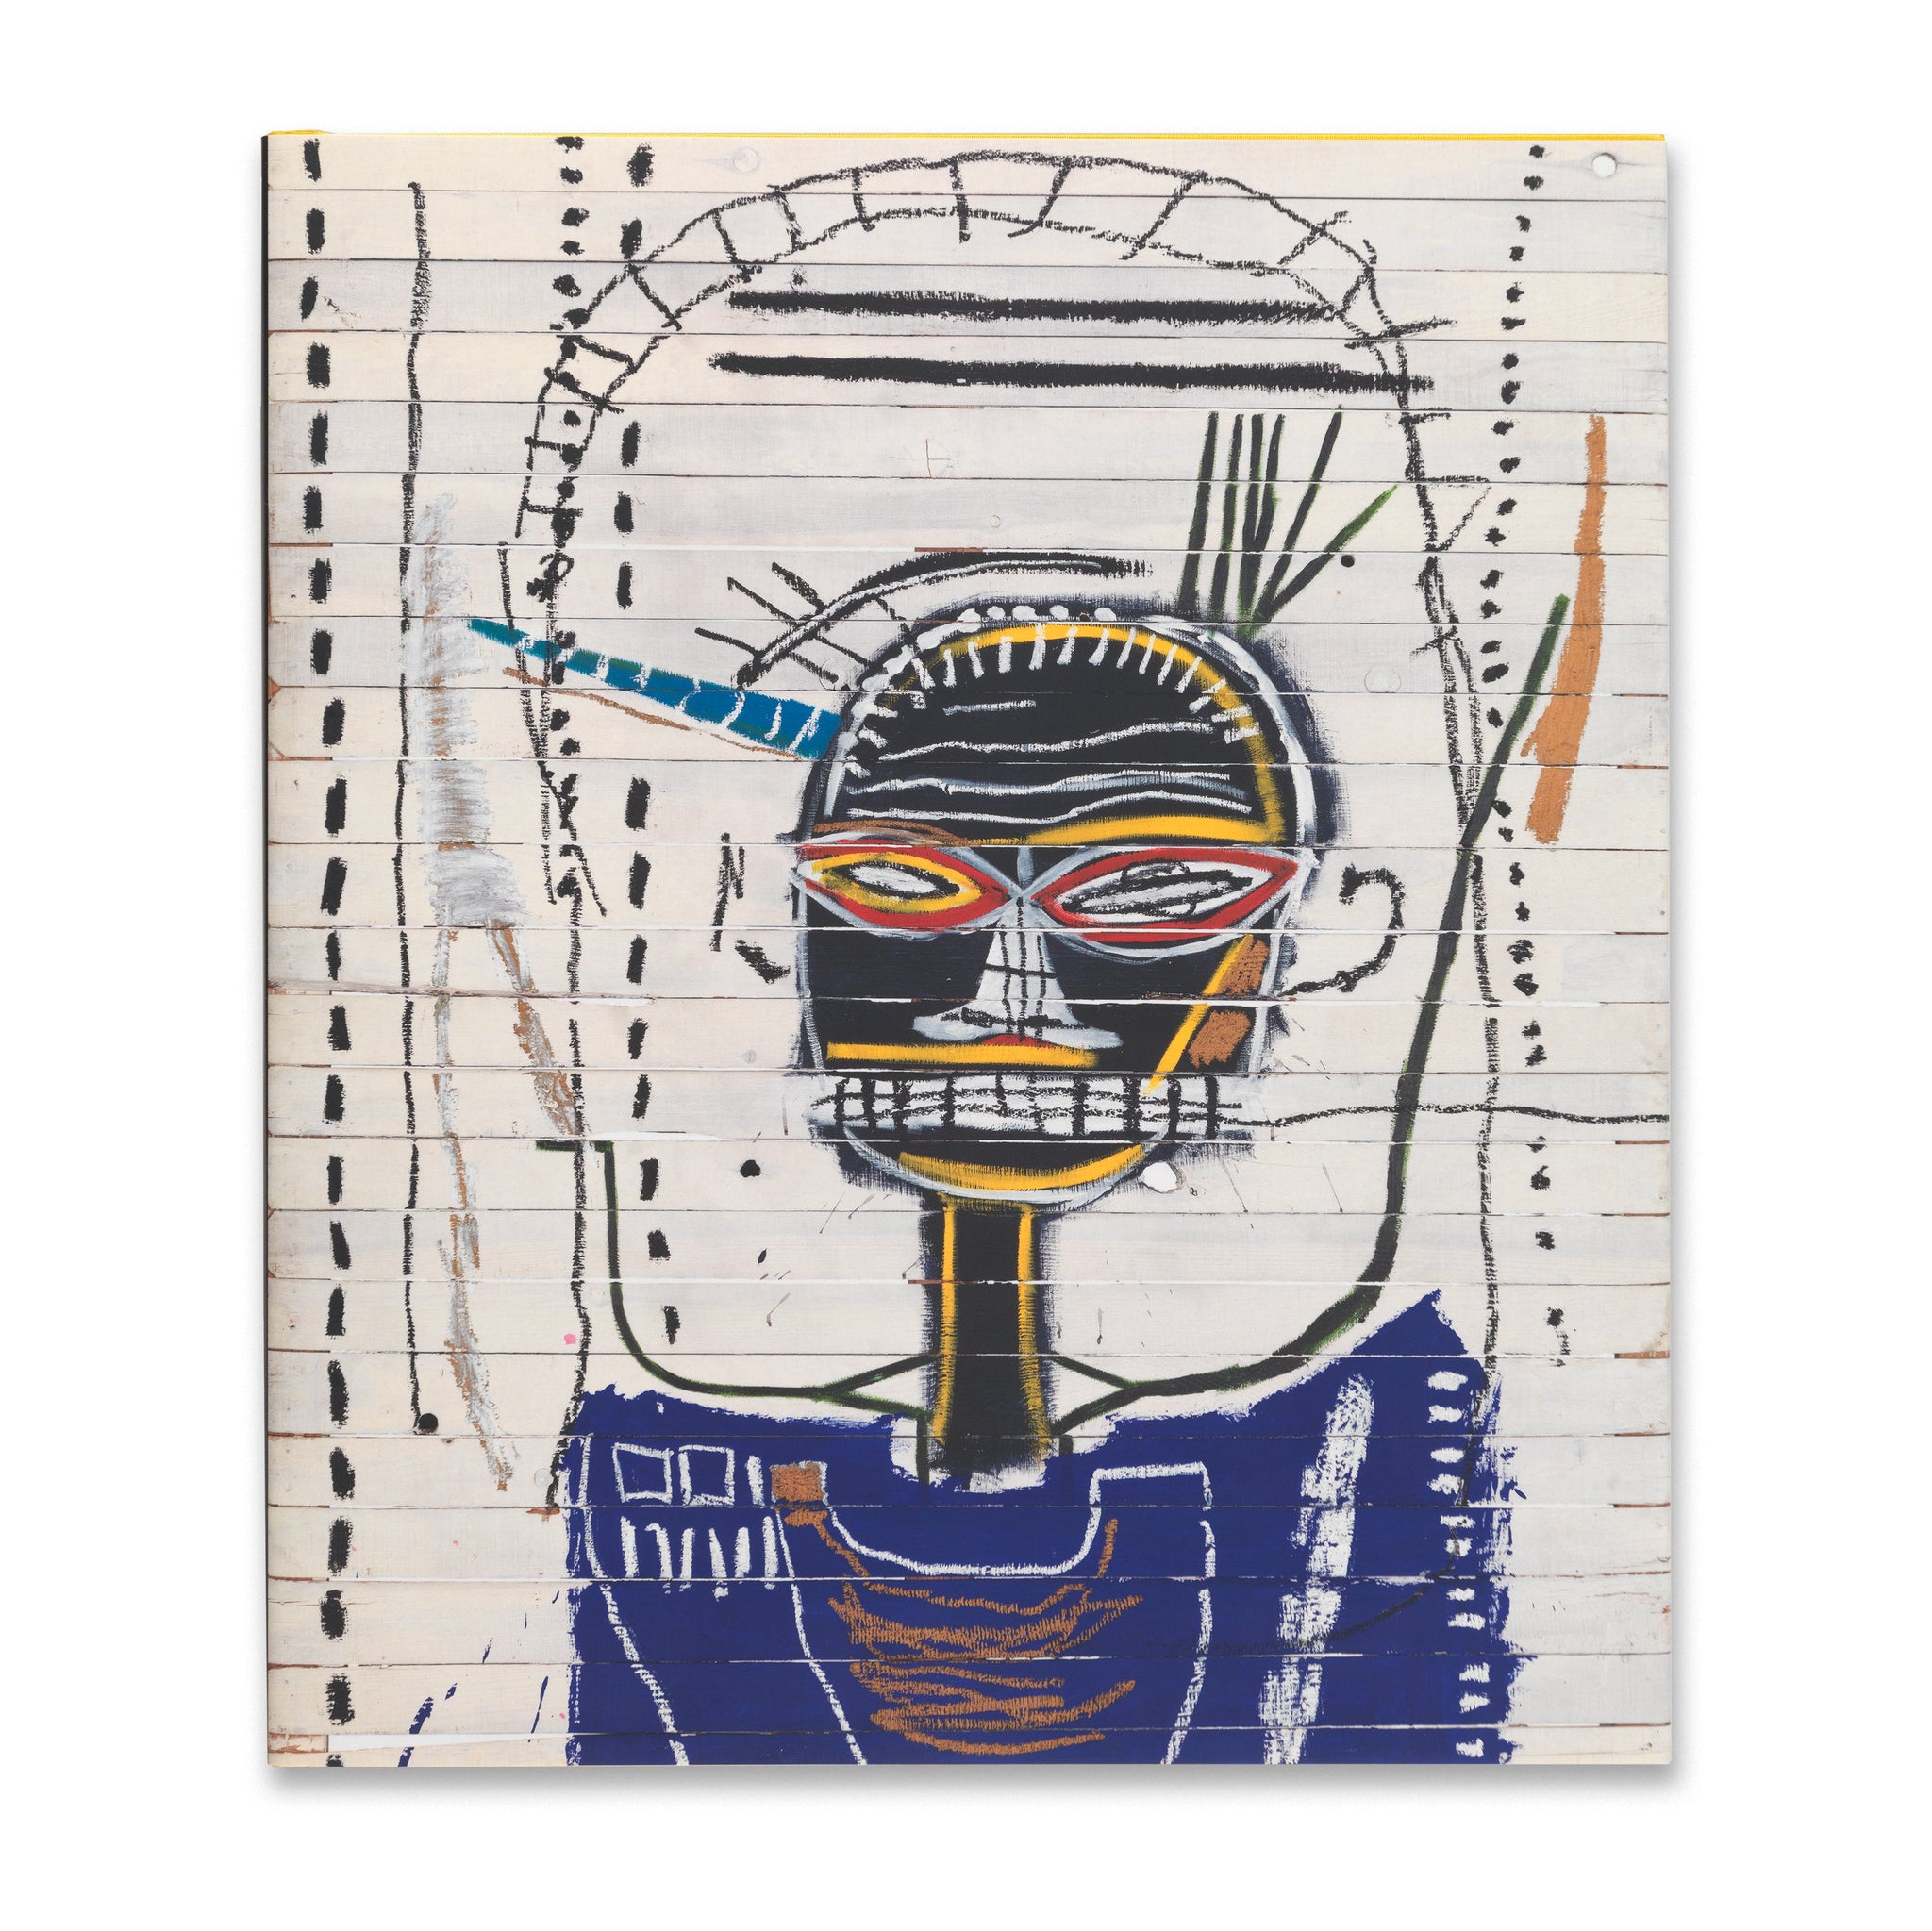 Cover of the book Jean-Michel Basquiat, published in 2015